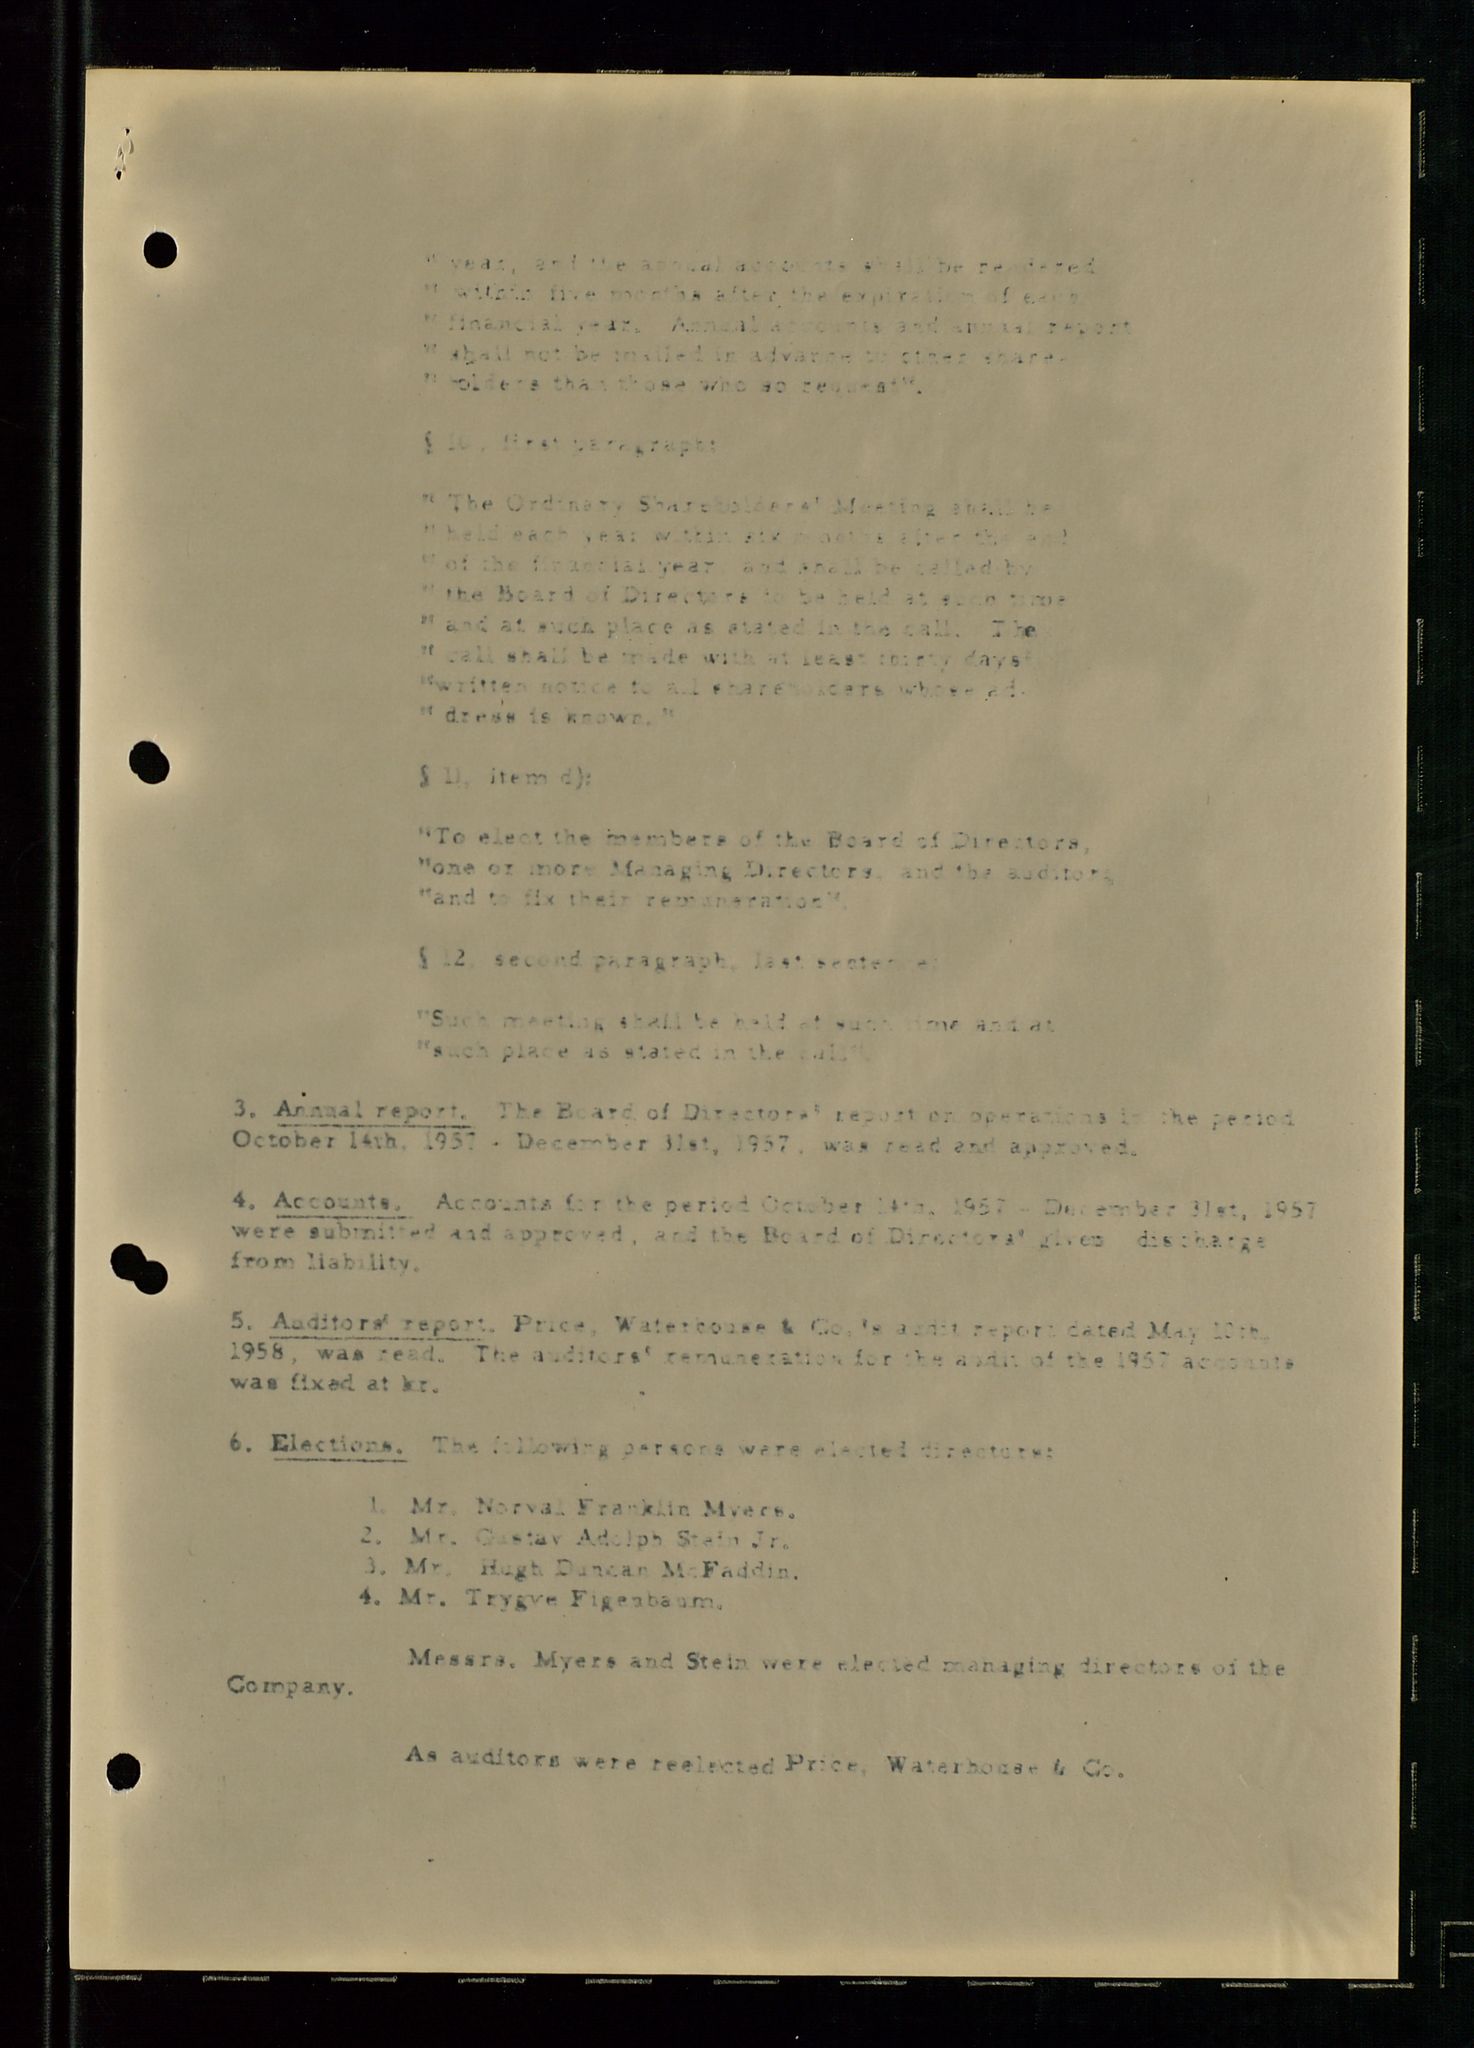 PA 1537 - A/S Essoraffineriet Norge, SAST/A-101957/A/Aa/L0002/0001: Styremøter / Shareholder meetings, Board meeting minutes, 1957-1961, s. 38